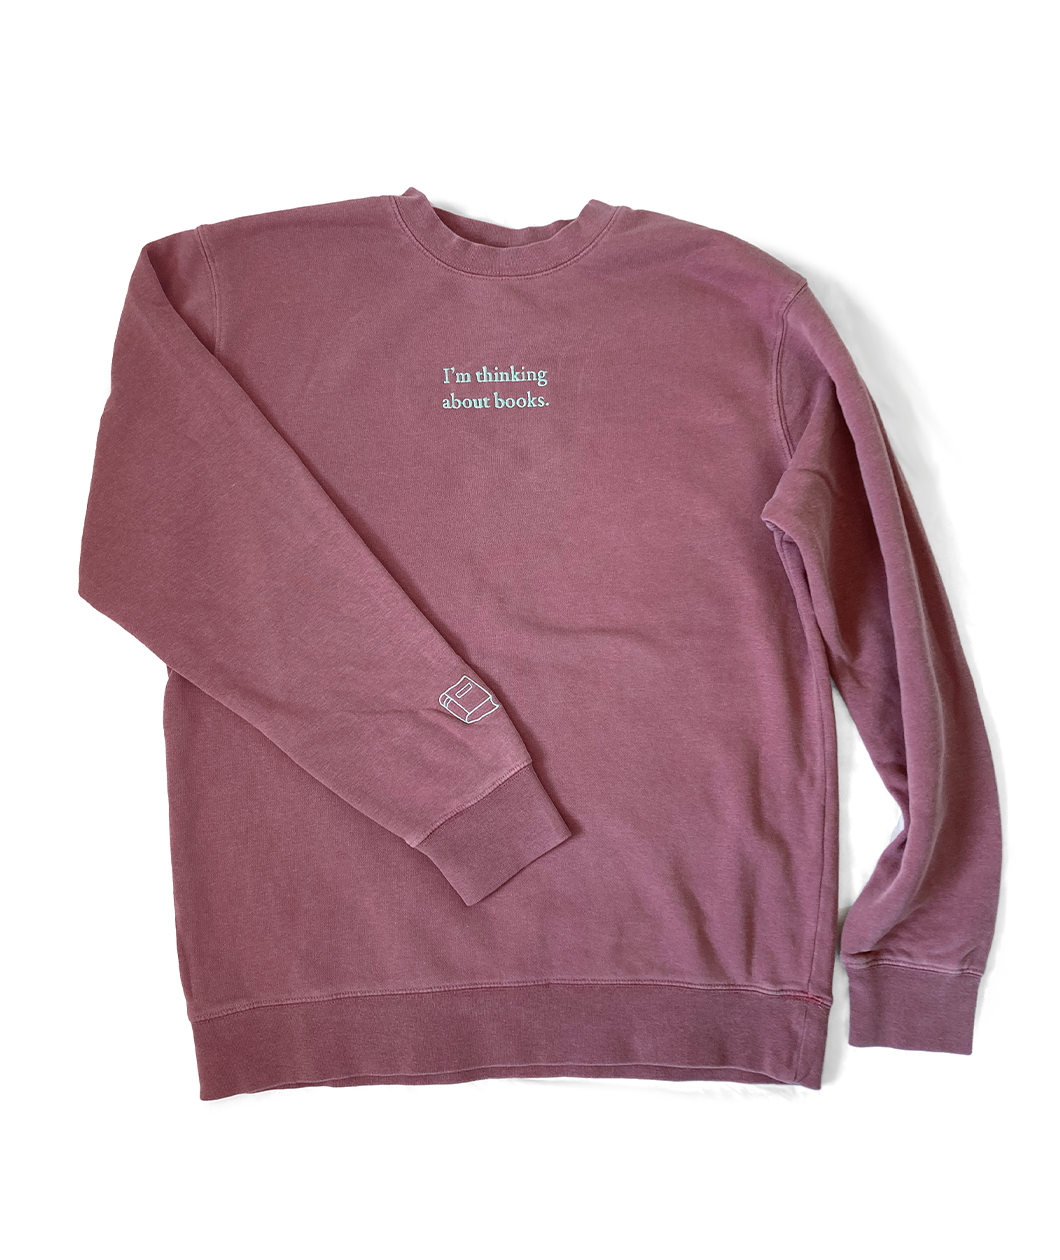 A dusty rose sweatshirt with mint green writing on the front center and a small mint green outline of a book on the left sleeve - by Ariel Bissett